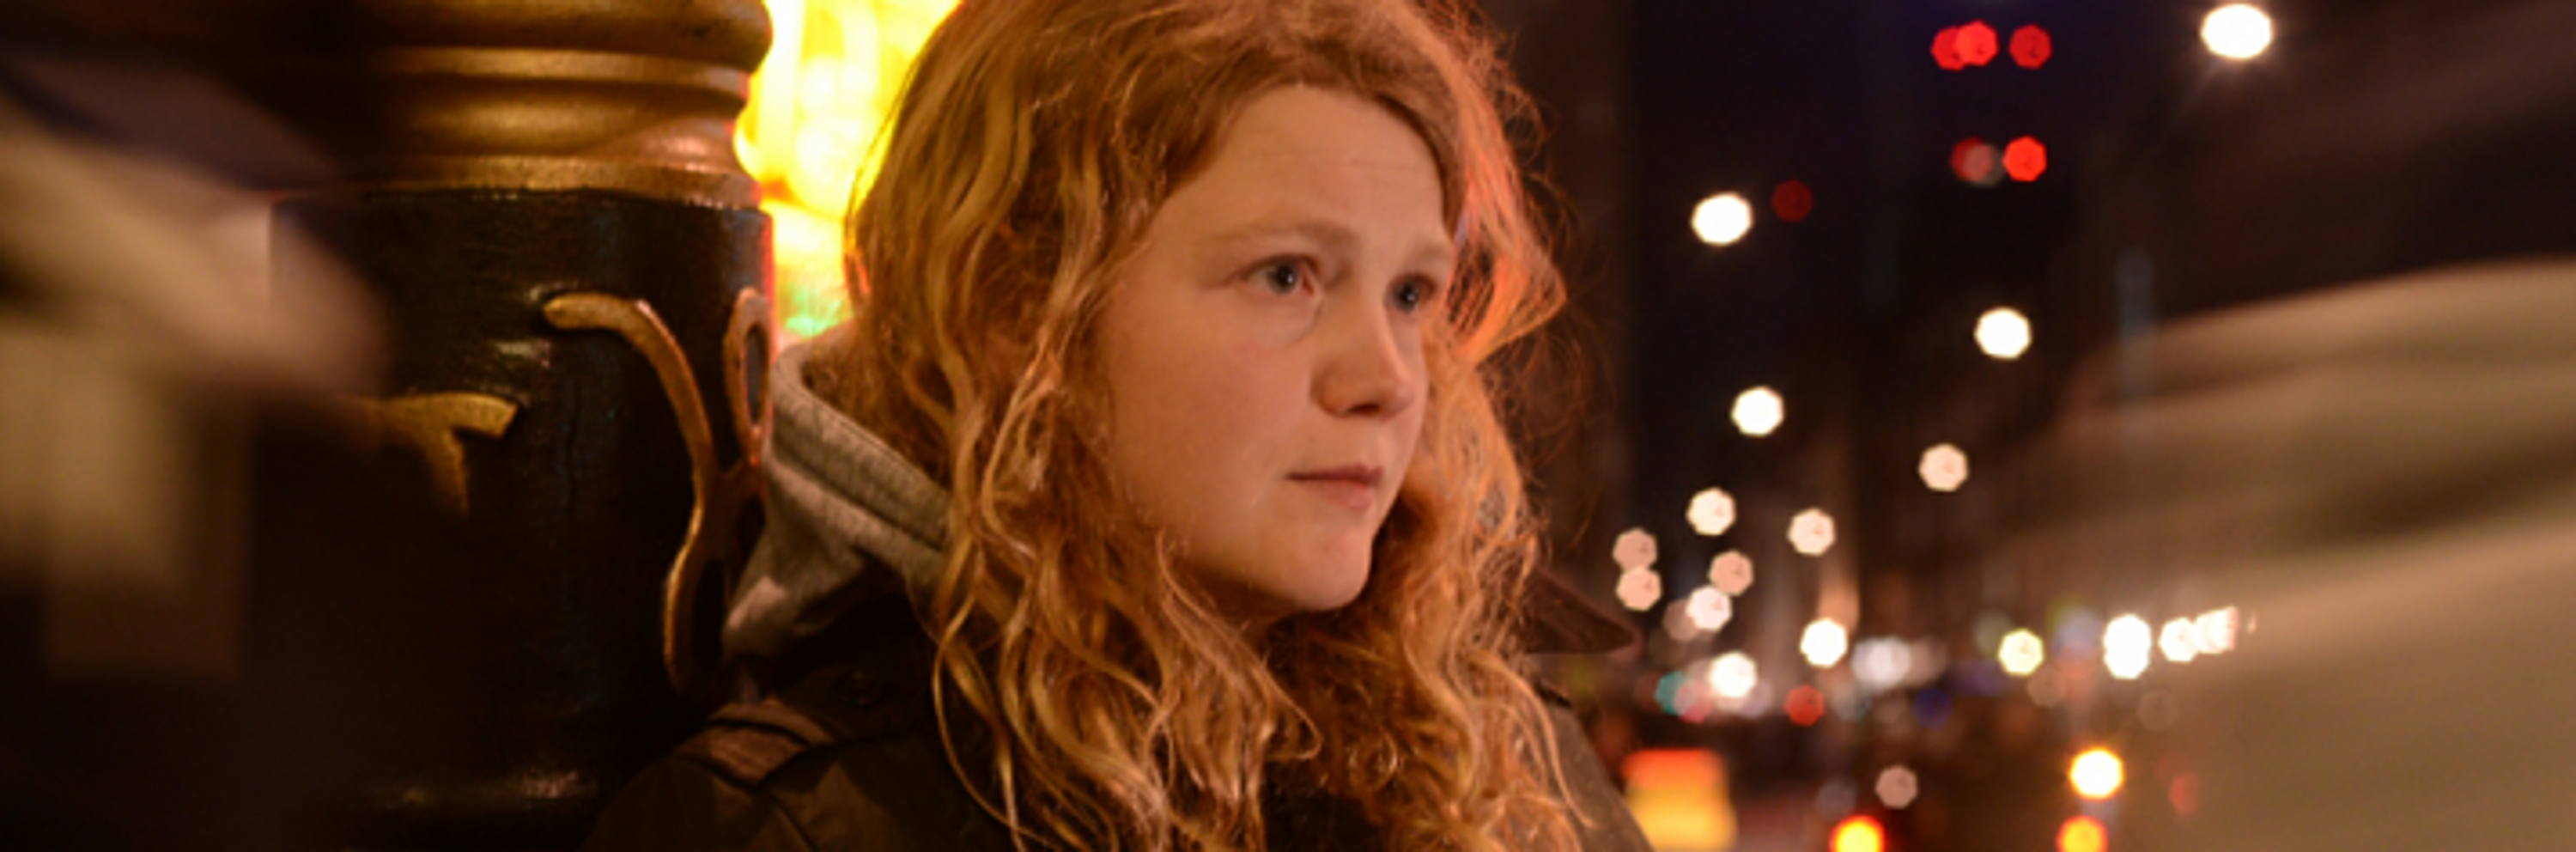 europe-is-lost-kate-tempest_opt